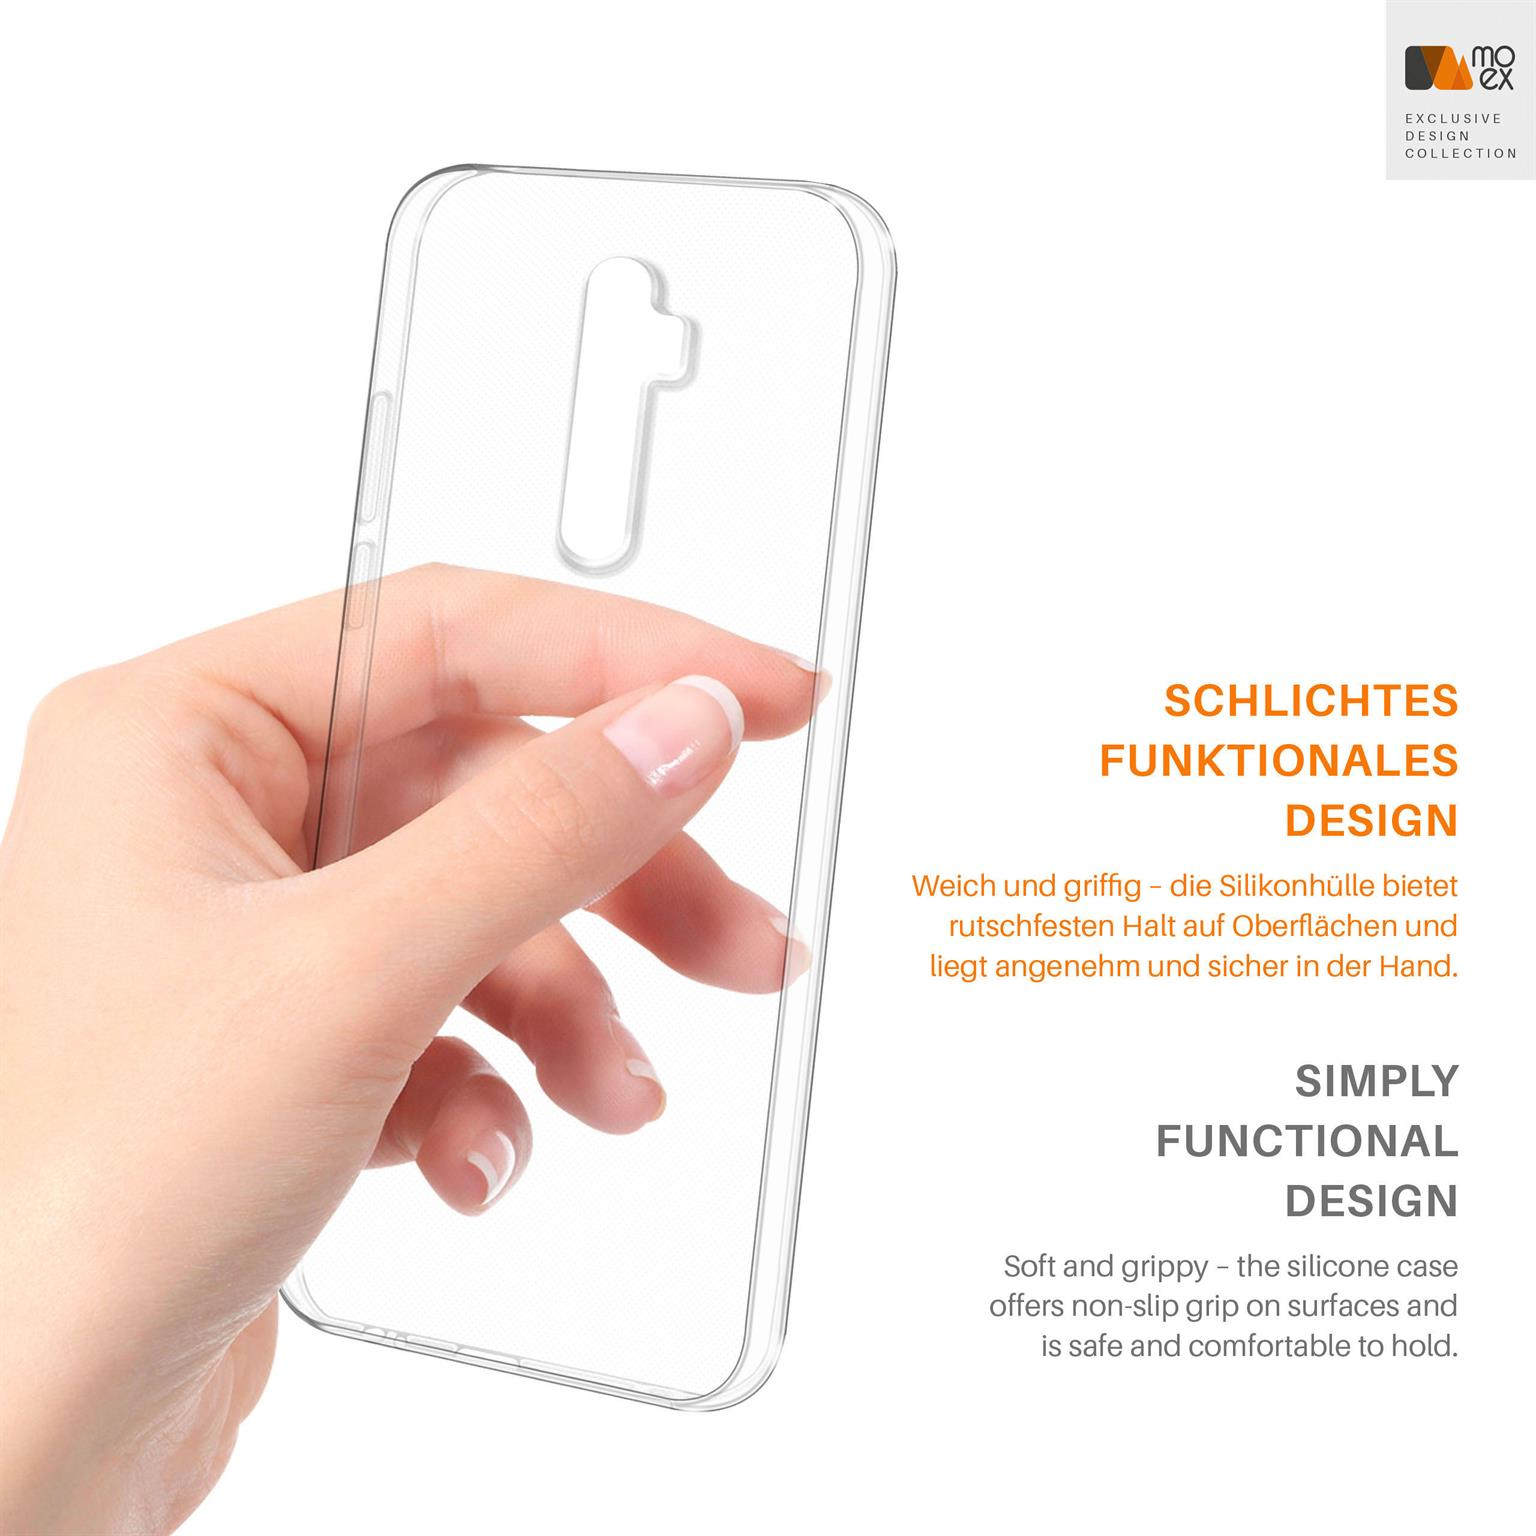 Backcover, Case, Crystal-Clear Oppo, Aero Reno2, MOEX